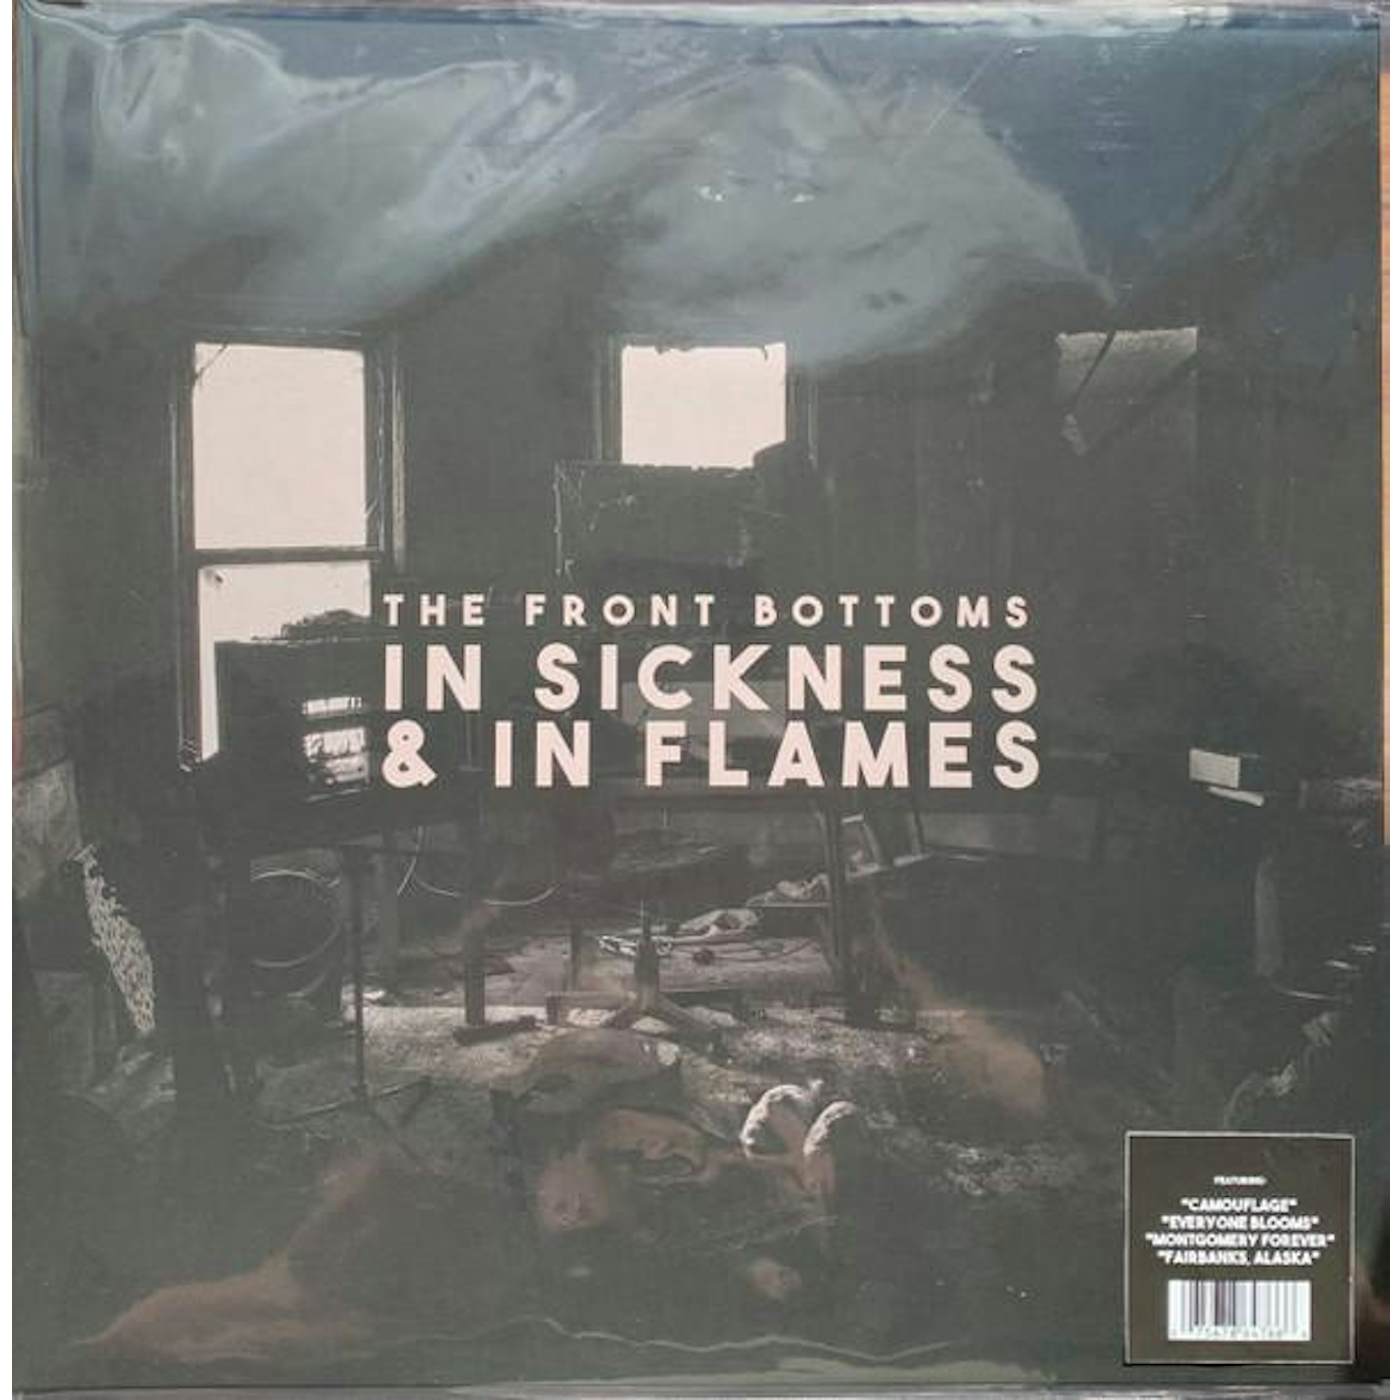 The Front Bottoms In Sickness & In Flames Vinyl Record